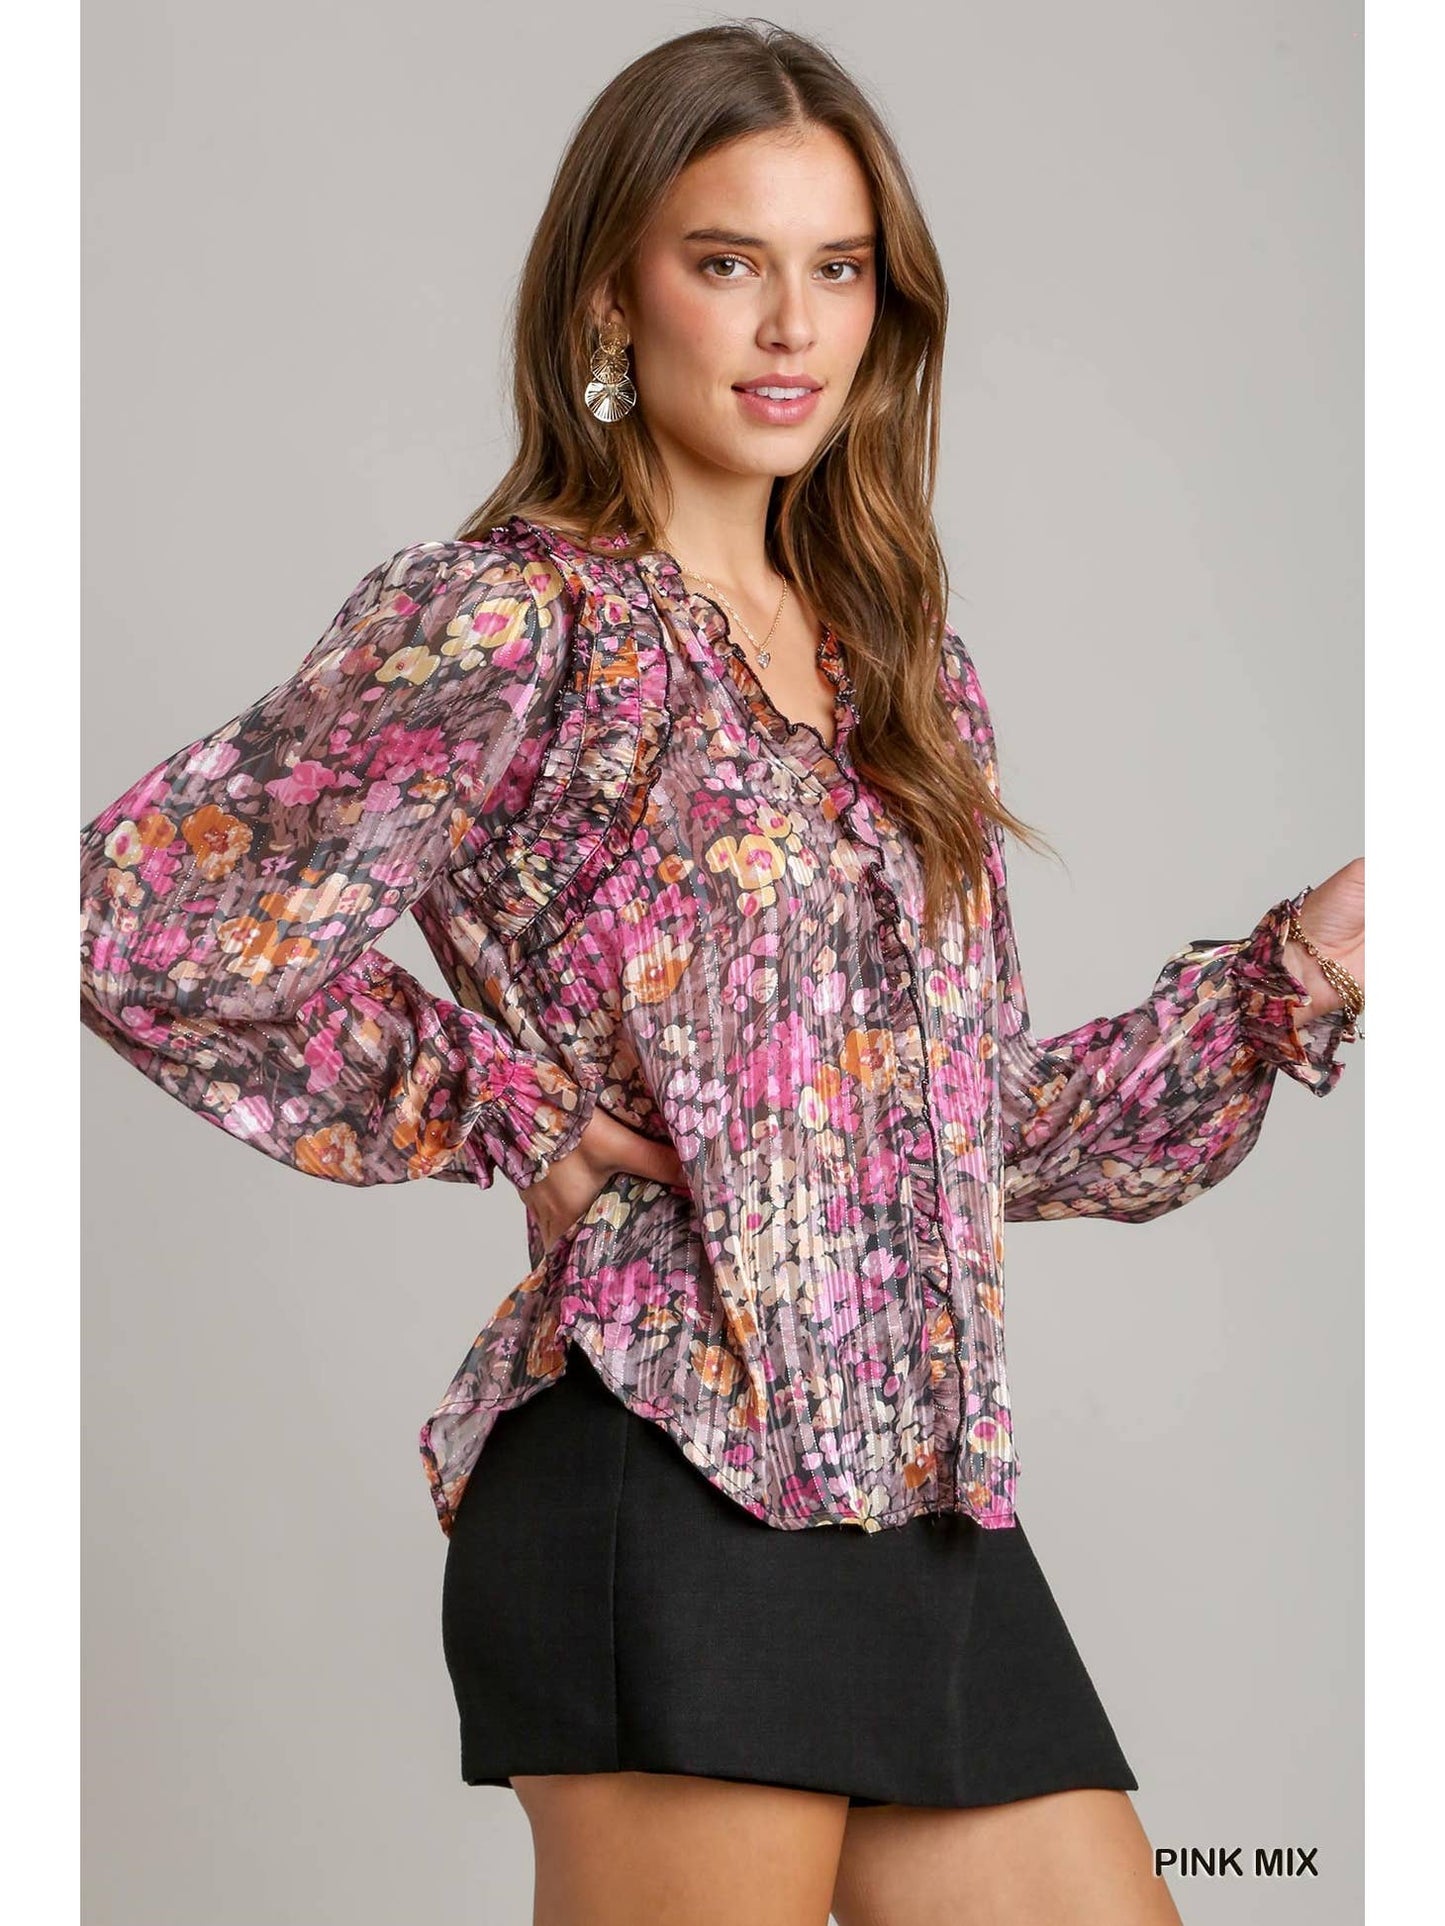 Pull Over Blouse, REBELRY BOUTIQUE, Arvada, CO